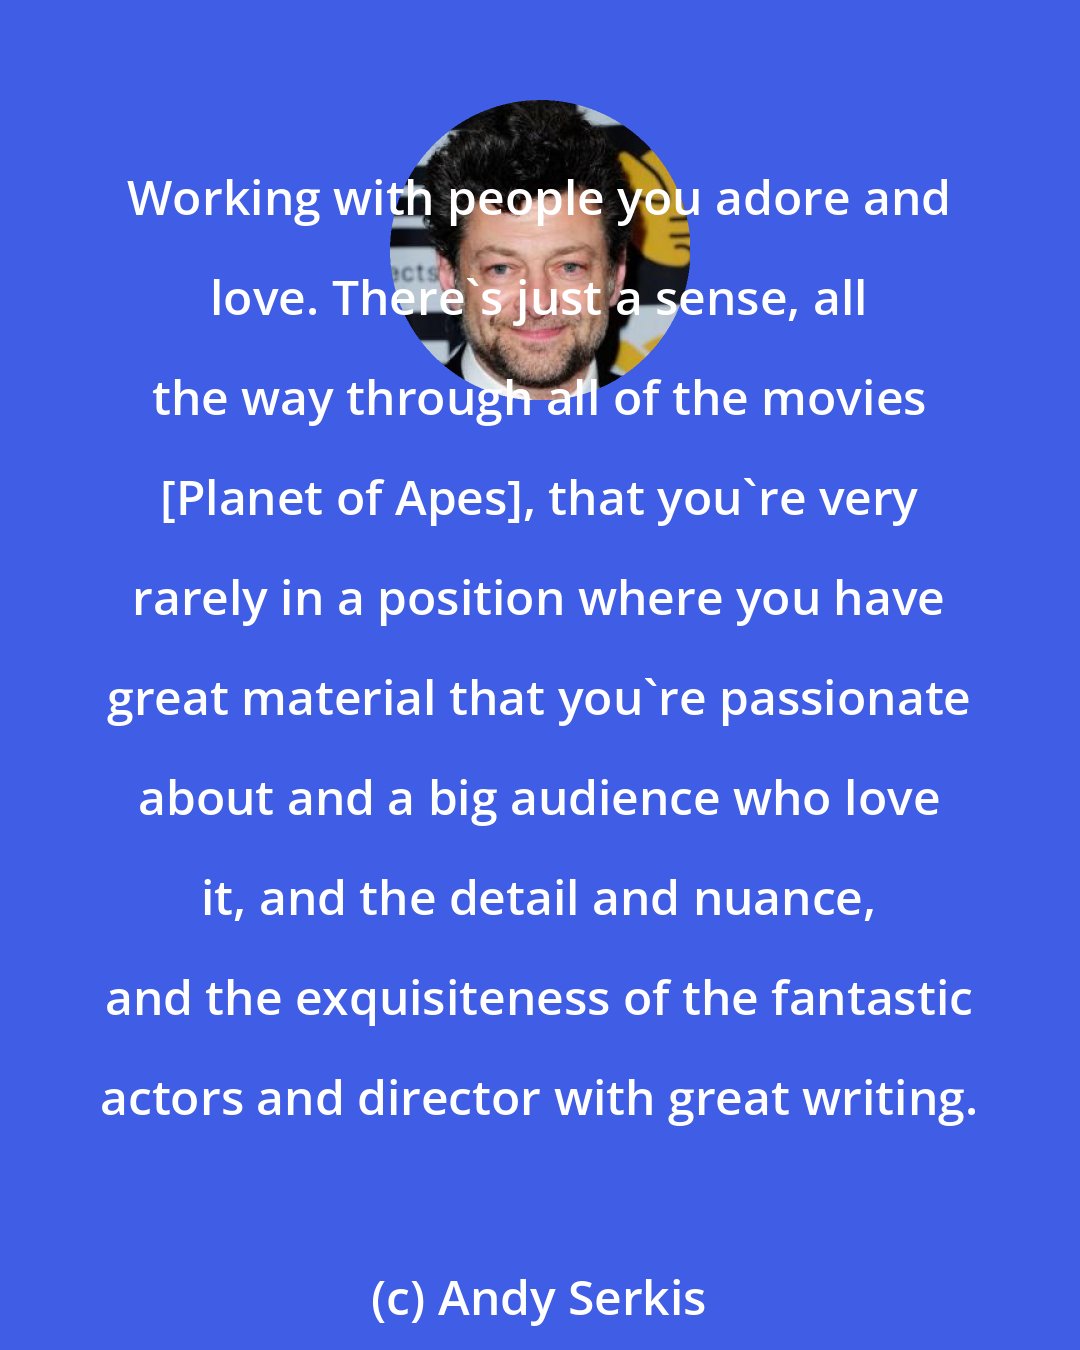 Andy Serkis: Working with people you adore and love. There's just a sense, all the way through all of the movies [Planet of Apes], that you're very rarely in a position where you have great material that you're passionate about and a big audience who love it, and the detail and nuance, and the exquisiteness of the fantastic actors and director with great writing.